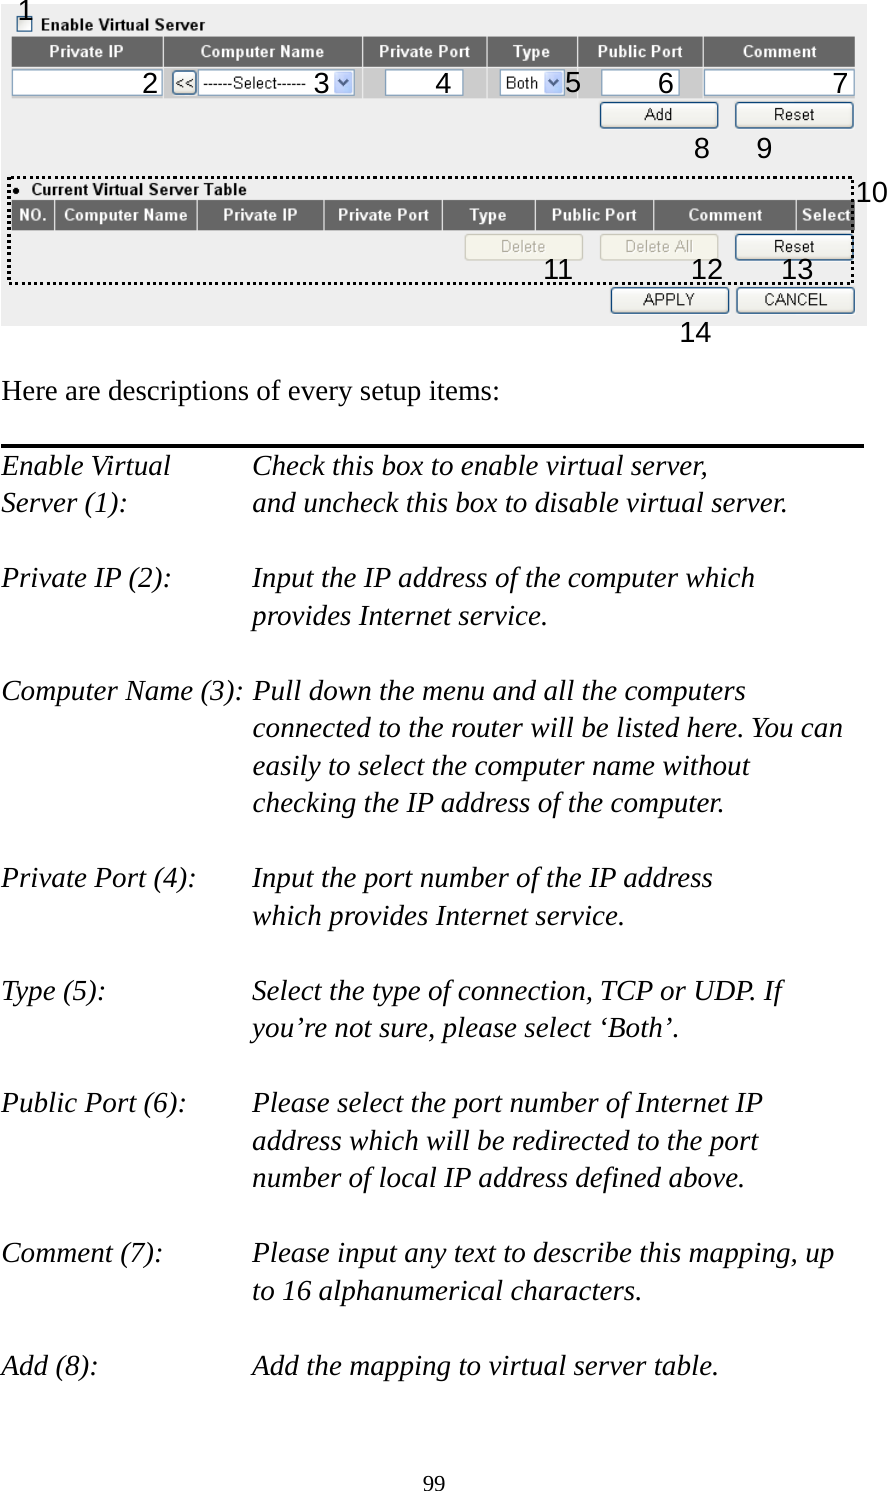 99   Here are descriptions of every setup items:  Enable Virtual      Check this box to enable virtual server, Server (1):       and uncheck this box to disable virtual server.  Private IP (2):      Input the IP address of the computer which      provides Internet service.  Computer Name (3): Pull down the menu and all the computers connected to the router will be listed here. You can easily to select the computer name without checking the IP address of the computer.  Private Port (4):    Input the port number of the IP address      which provides Internet service.  Type (5):    Select the type of connection, TCP or UDP. If you’re not sure, please select ‘Both’.  Public Port (6):    Please select the port number of Internet IP address which will be redirected to the port number of local IP address defined above.  Comment (7):    Please input any text to describe this mapping, up to 16 alphanumerical characters.  Add (8):        Add the mapping to virtual server table.  1 2 3 4 5 8 9 10 11 12 13 14 7 6 